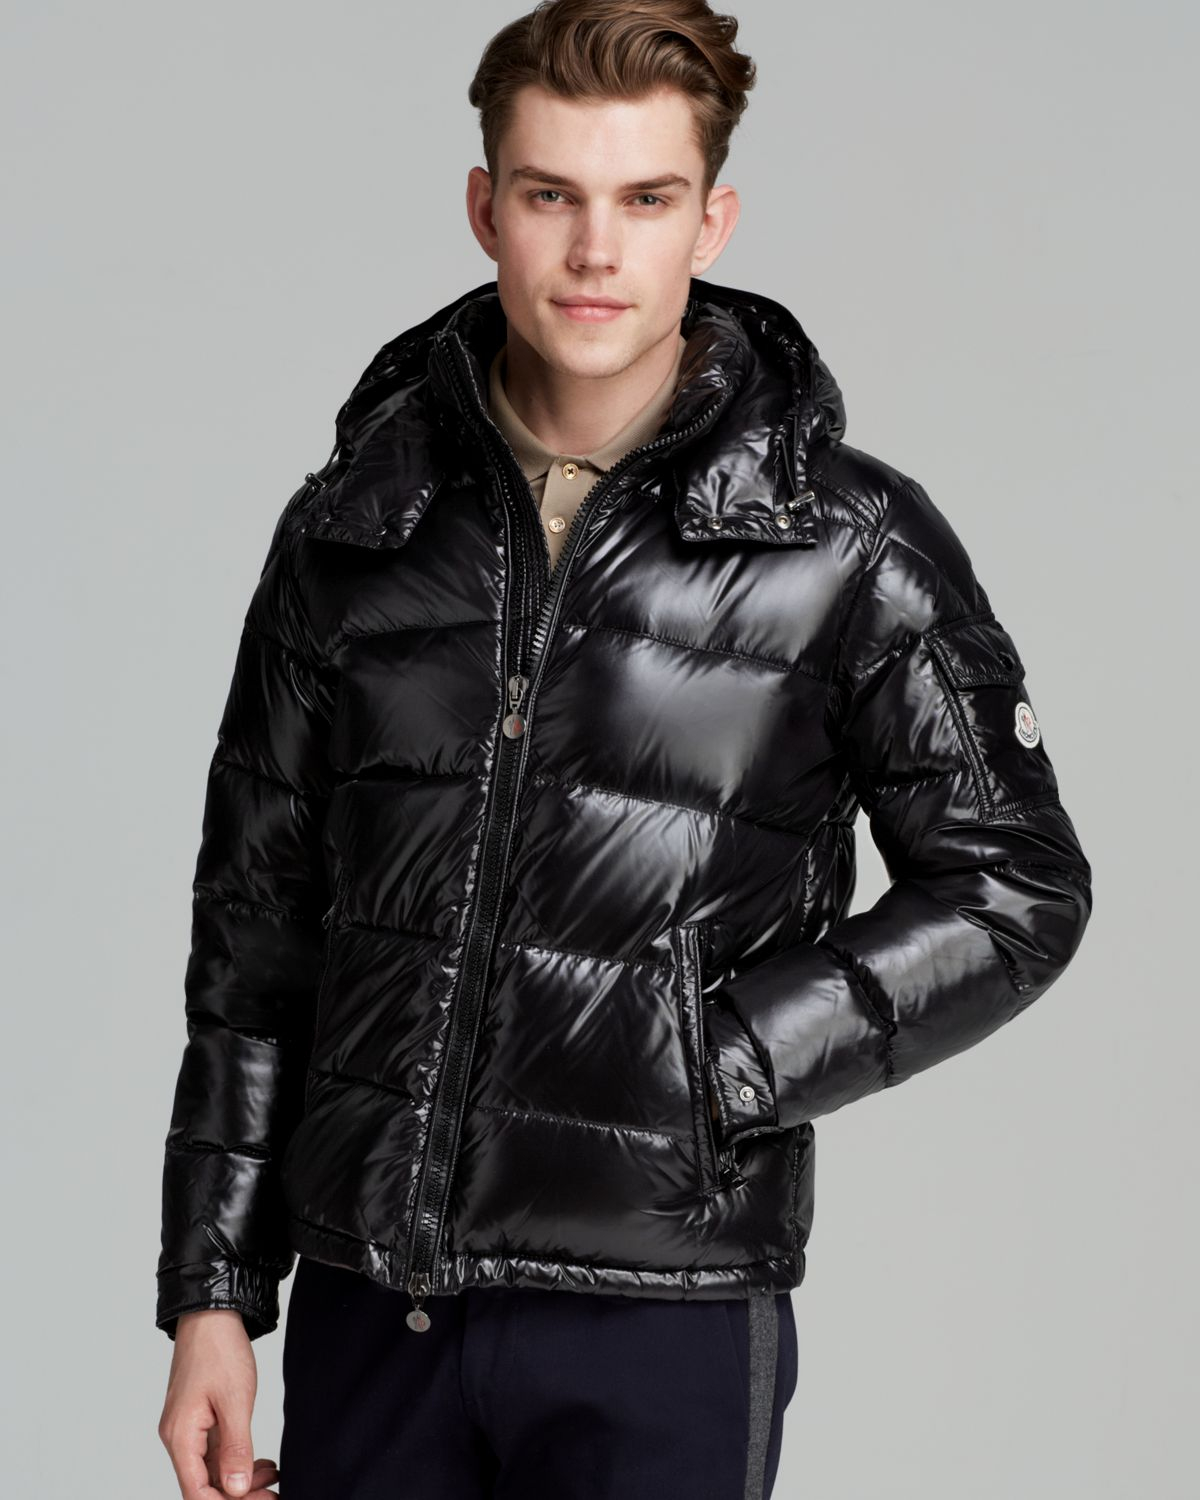 Moncler Maya Glossy Hooded Down Jacket in Black for Men - Lyst